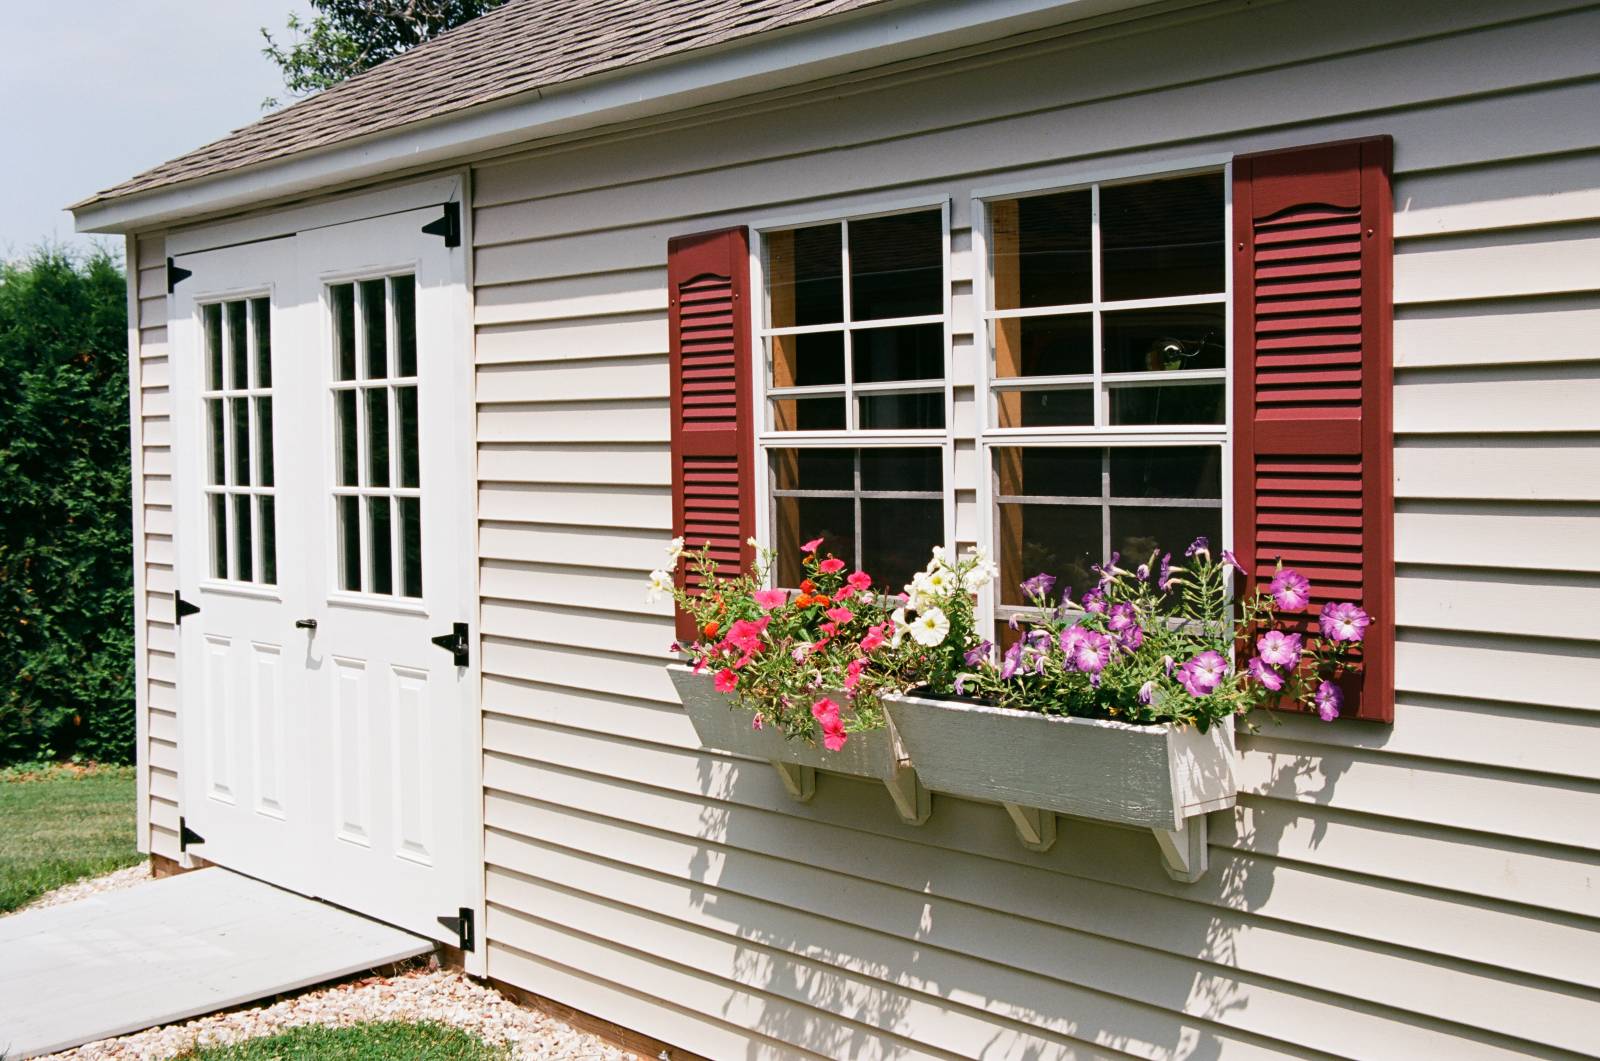 Vinyl siding • shutters • flower boxes • double door with half glass